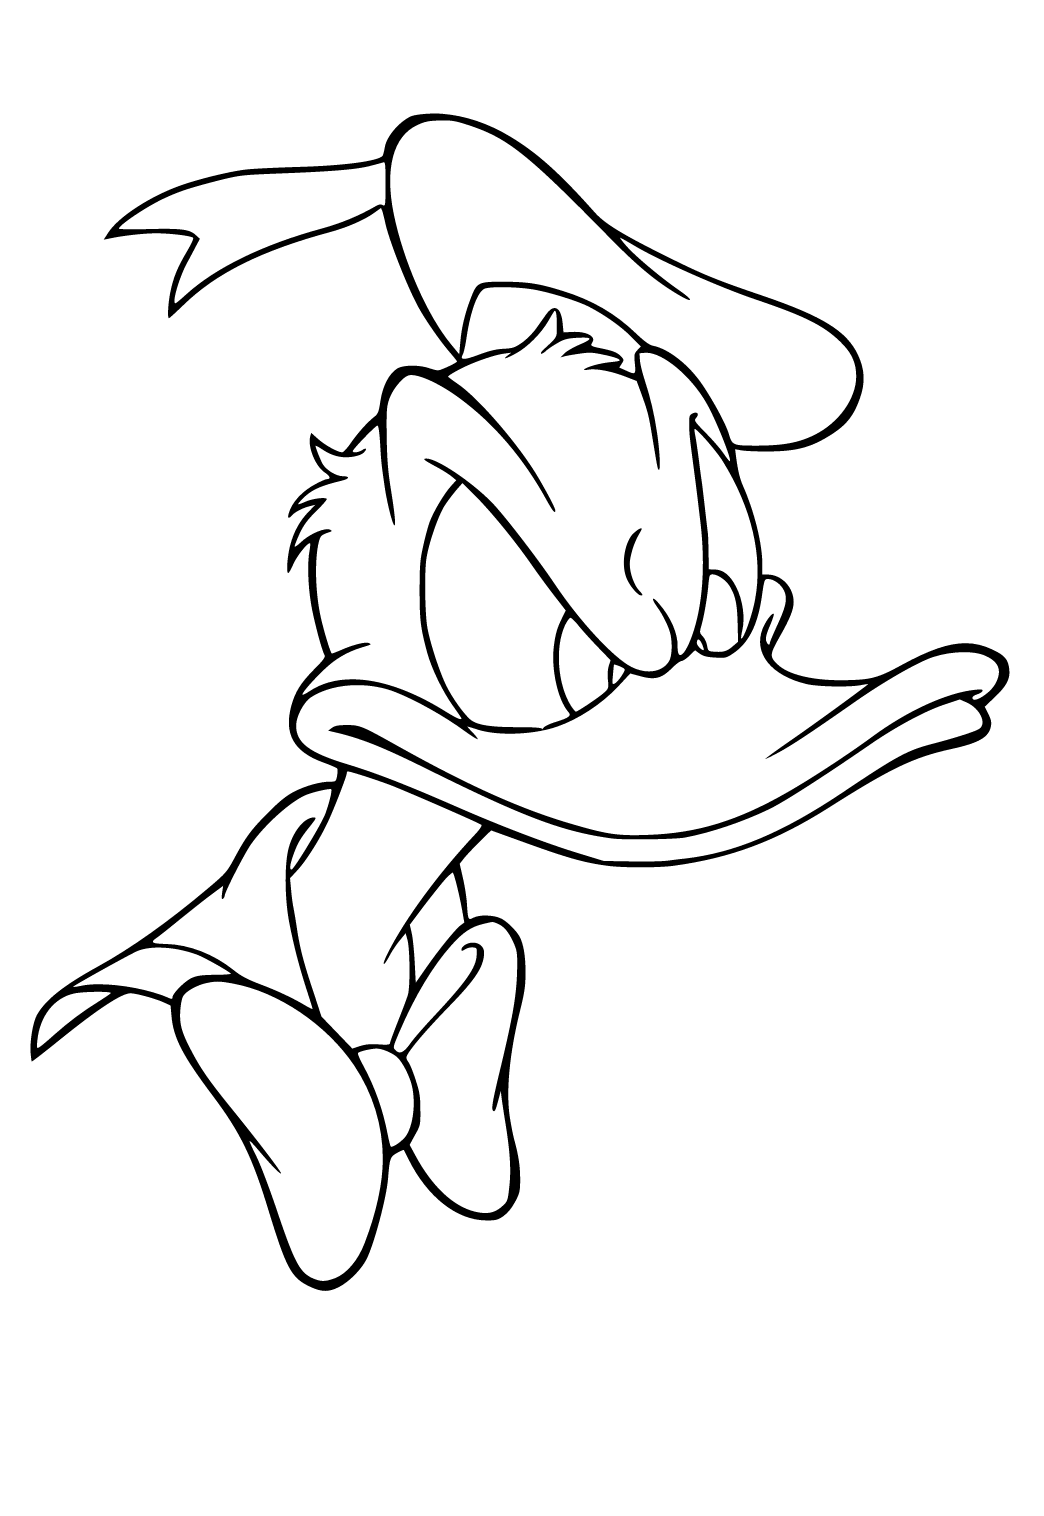 donald duck face coloring page